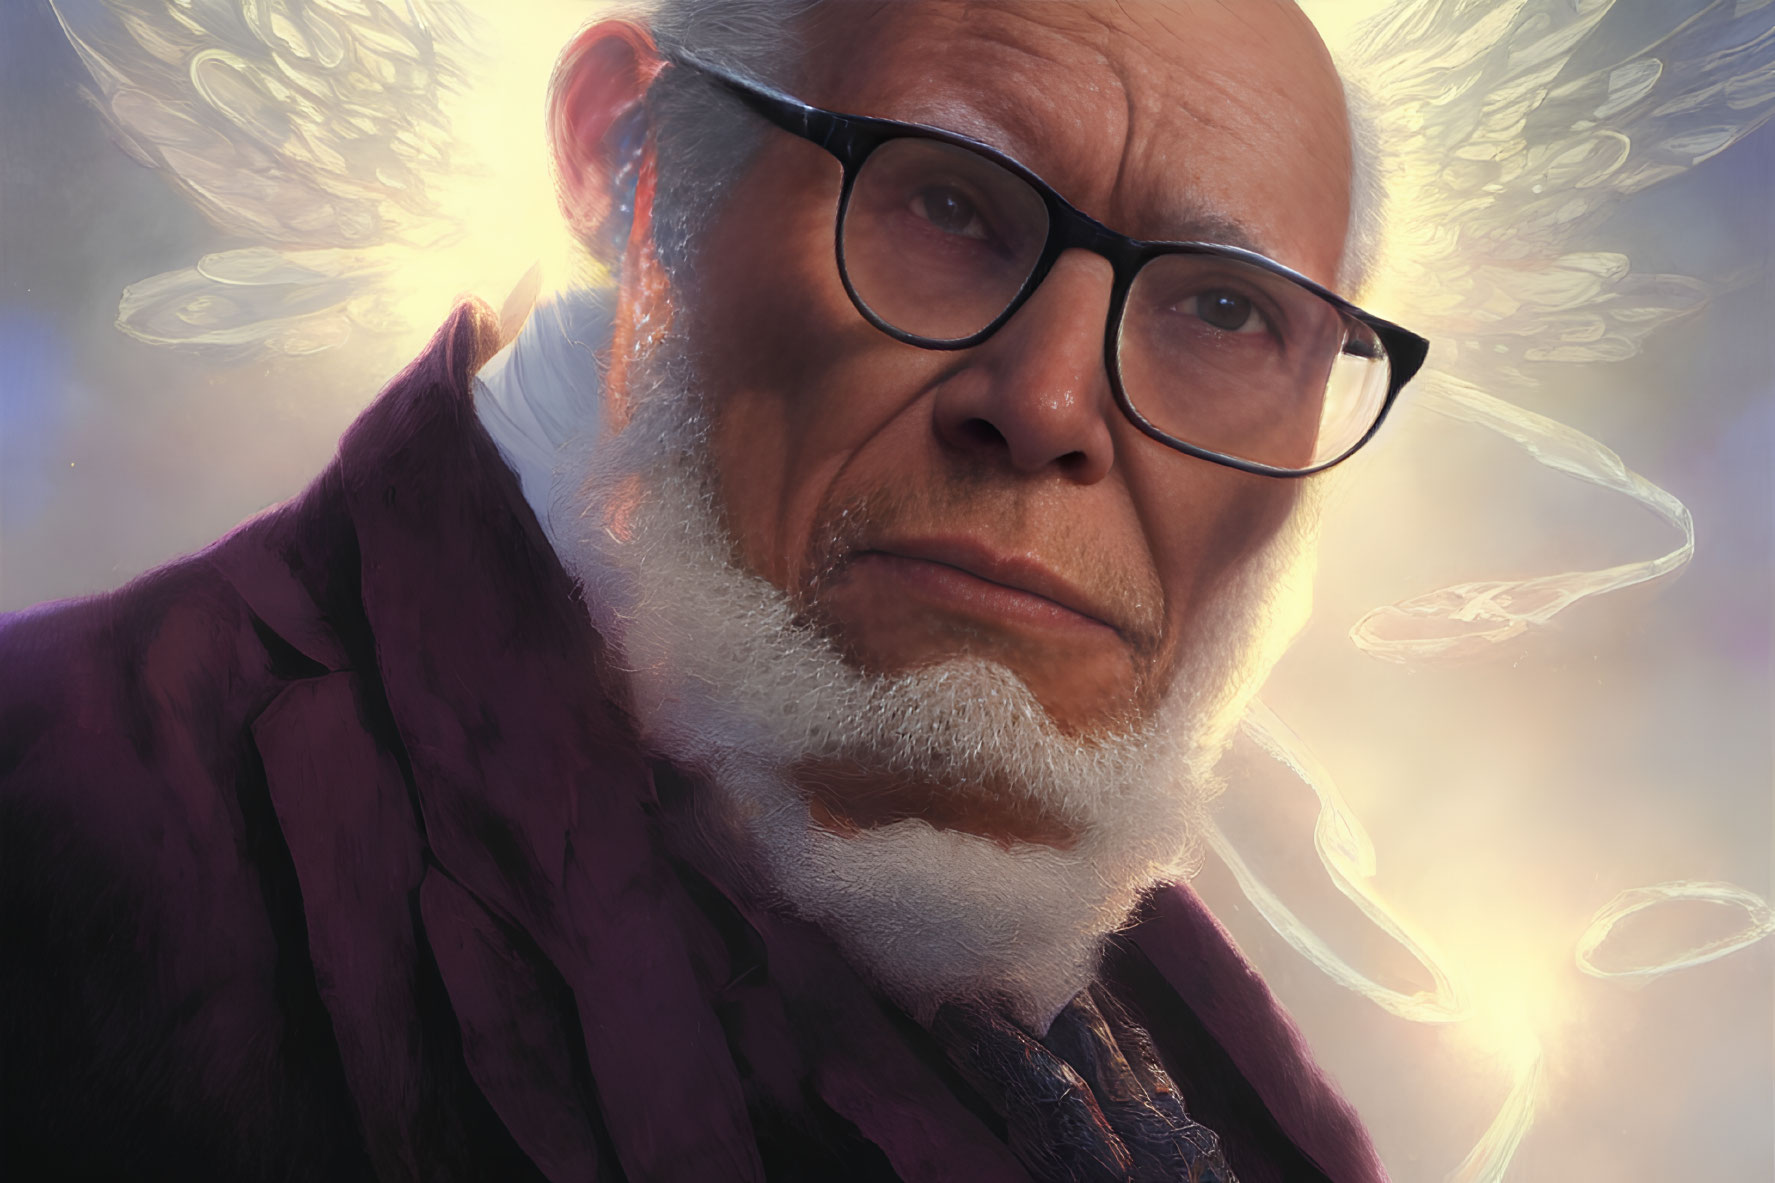 Elderly Man with Glasses and Purple Coat Surrounded by Glowing Ethereal Jellyfish Shapes